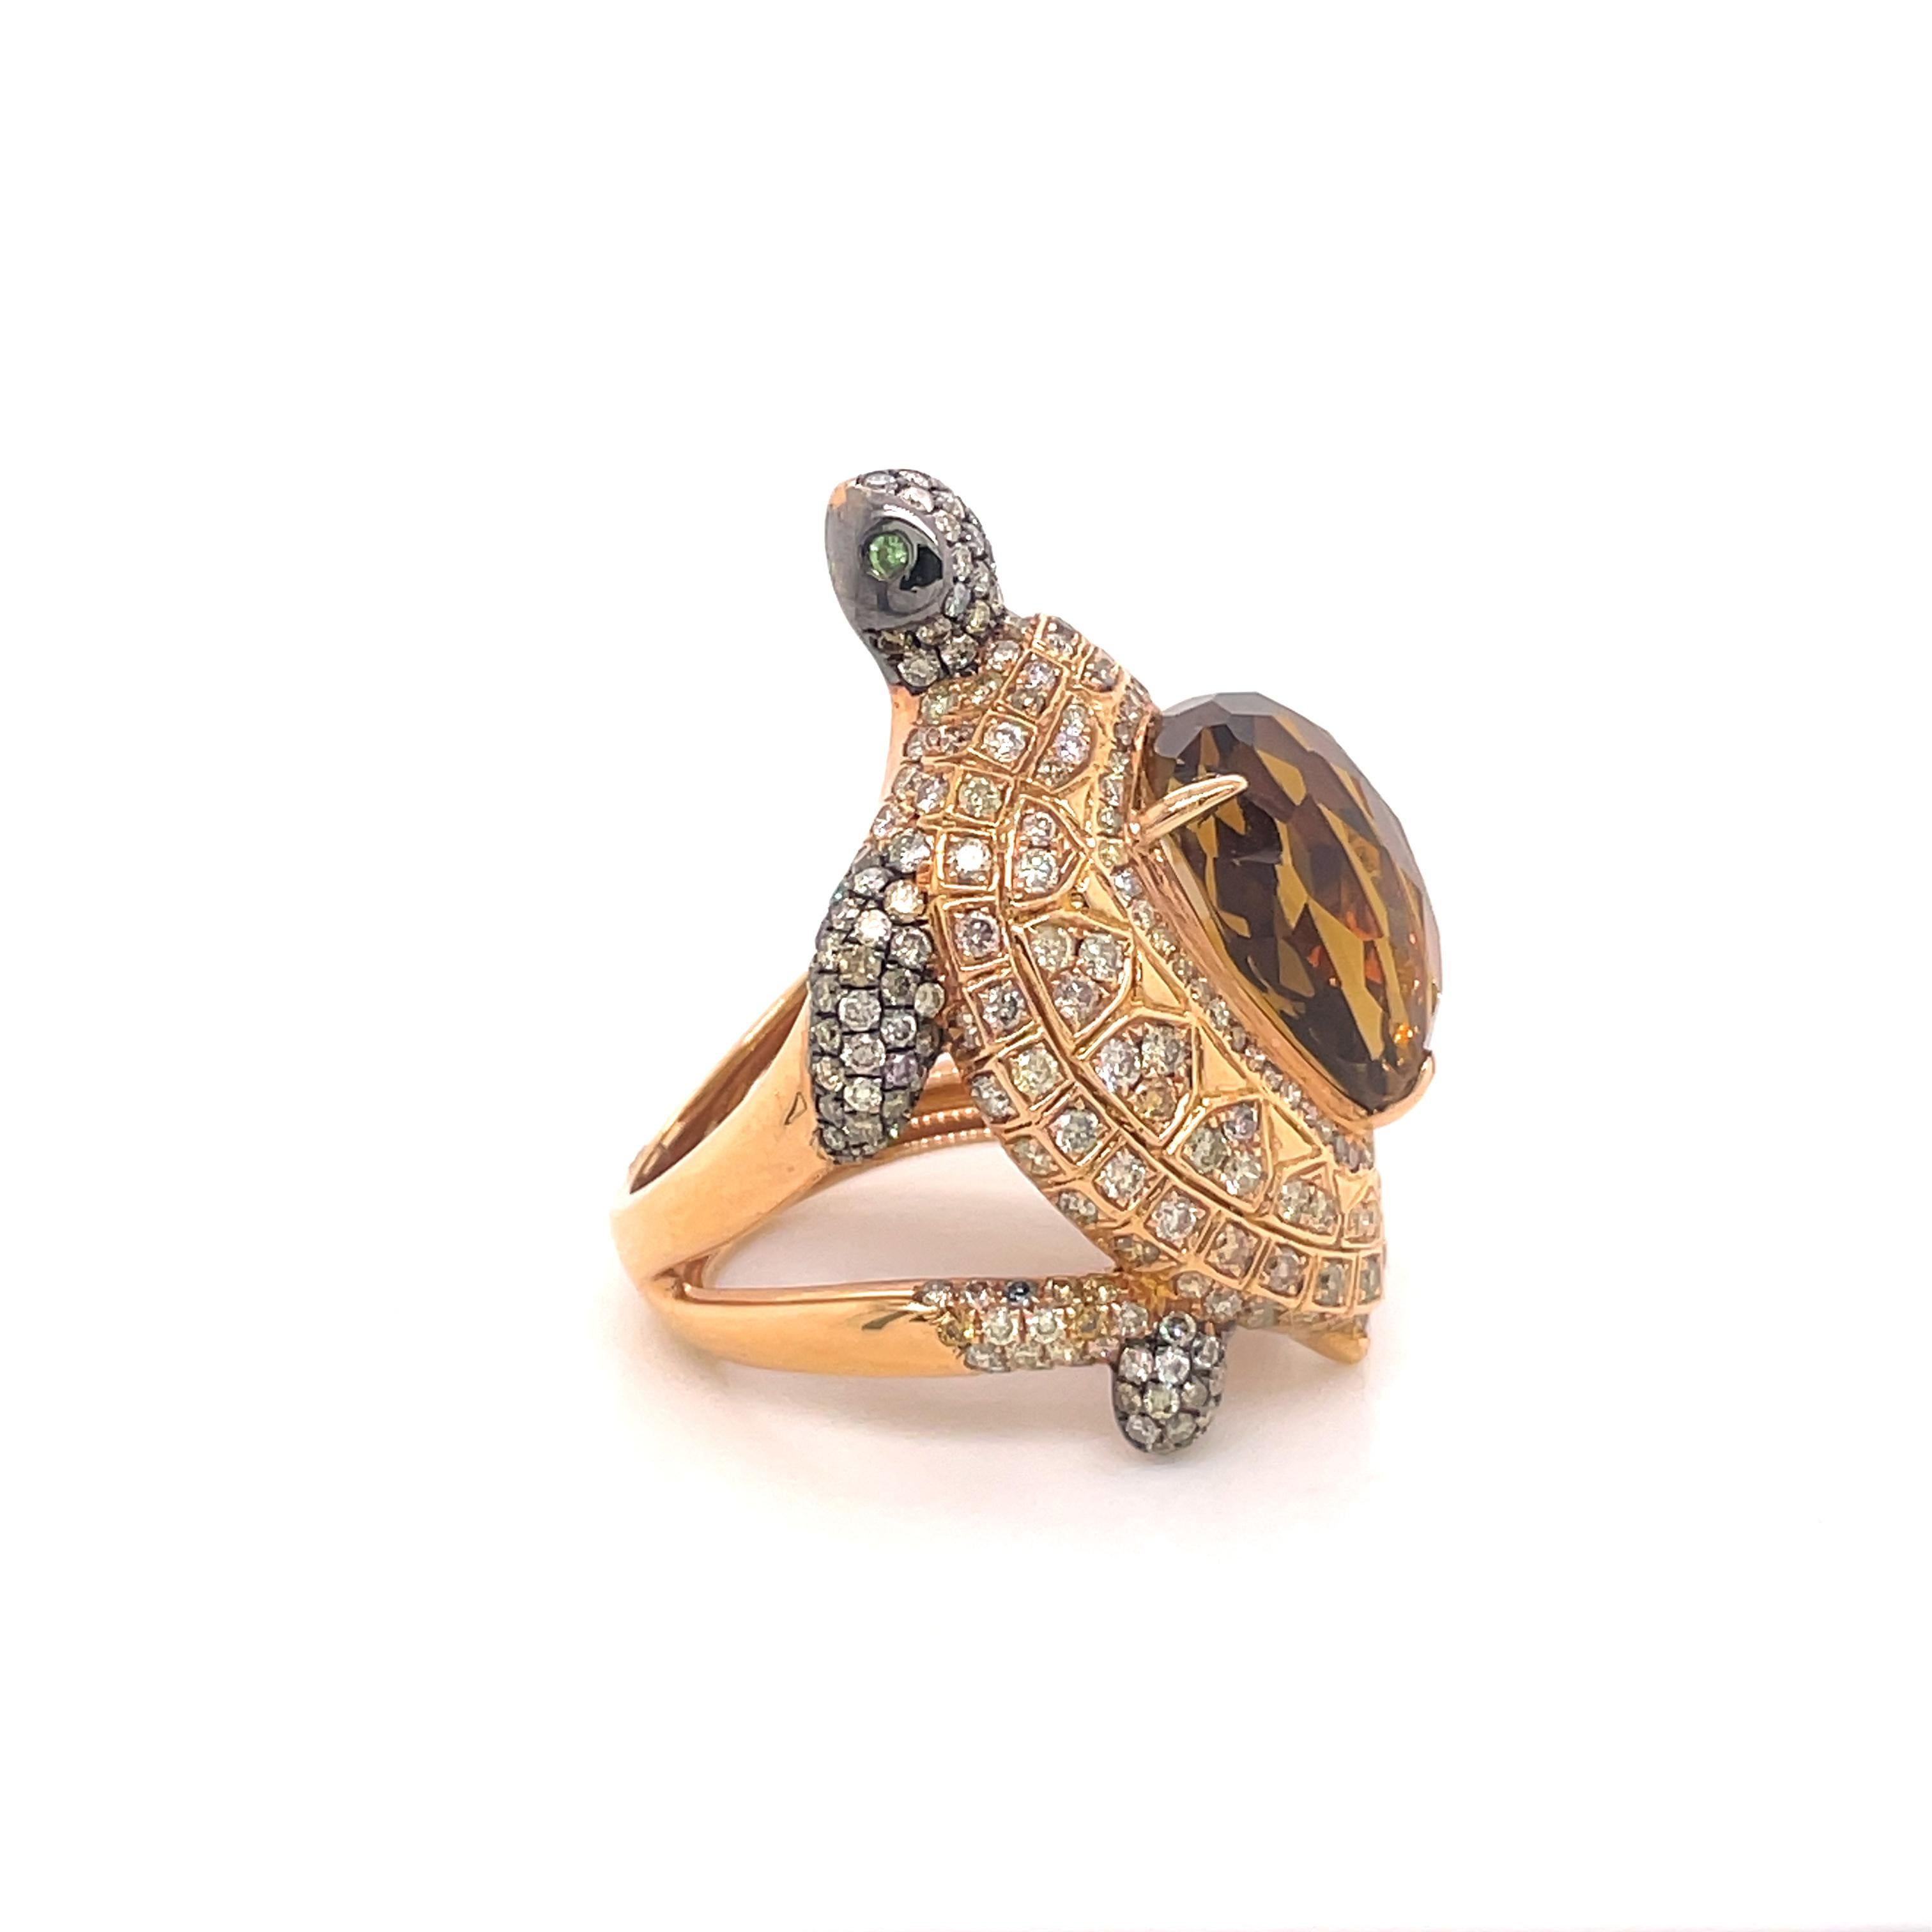 This captivating masterpiece that embodies the wonders of the natural world. The turtle's eyes are adorned with mesmerizing tsavorite gemstones, their deep green hue drawing you into the creature's soul. Its intricate body, crafted with exquisite